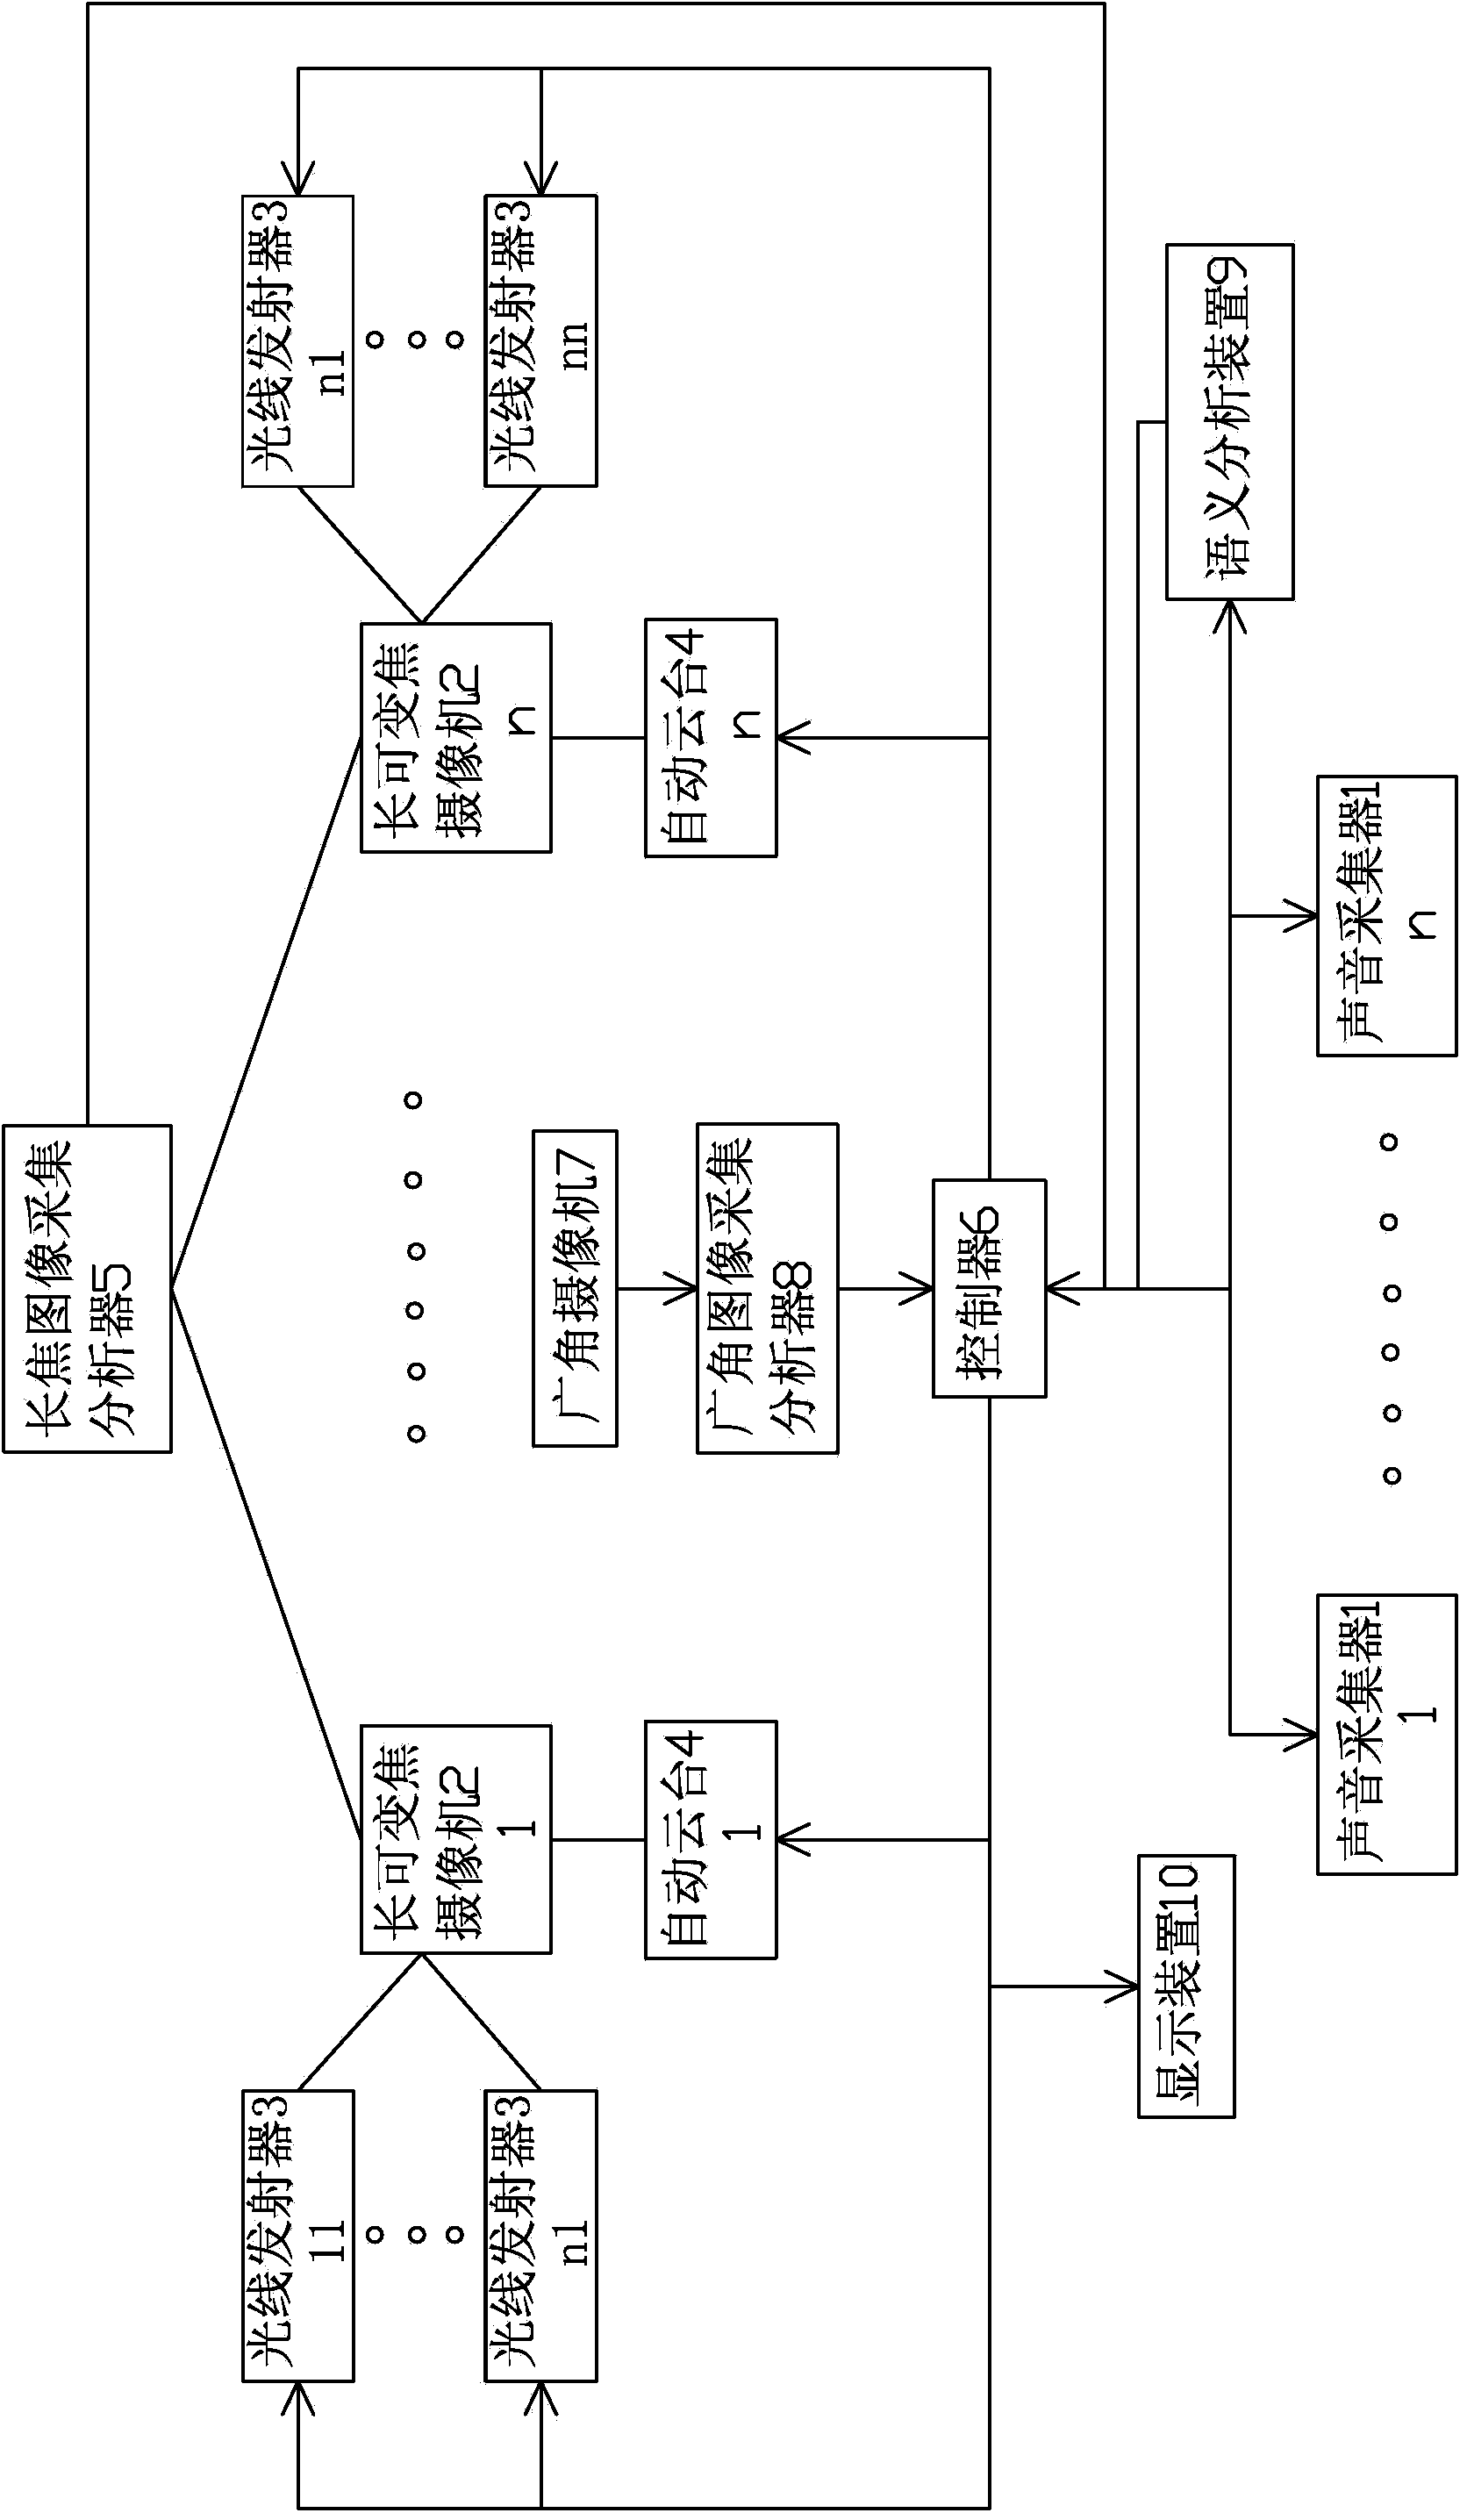 Sight connection-based voice command issuing device and method